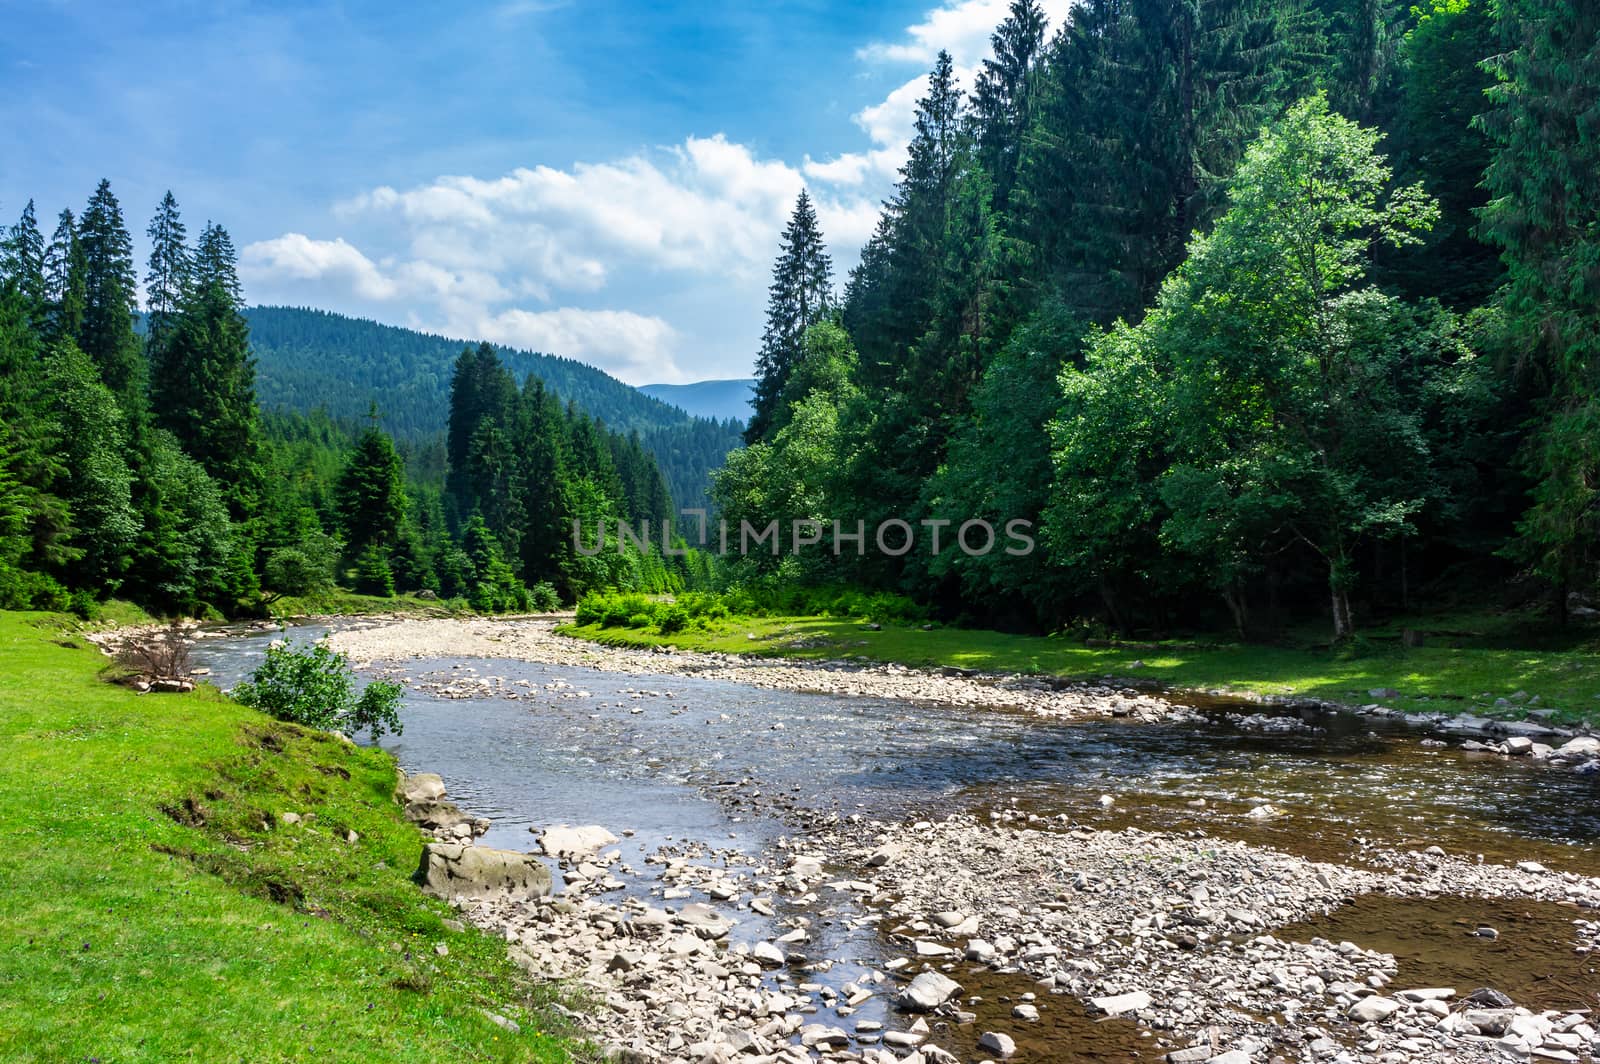 mountain river among the forest in summer by Pellinni